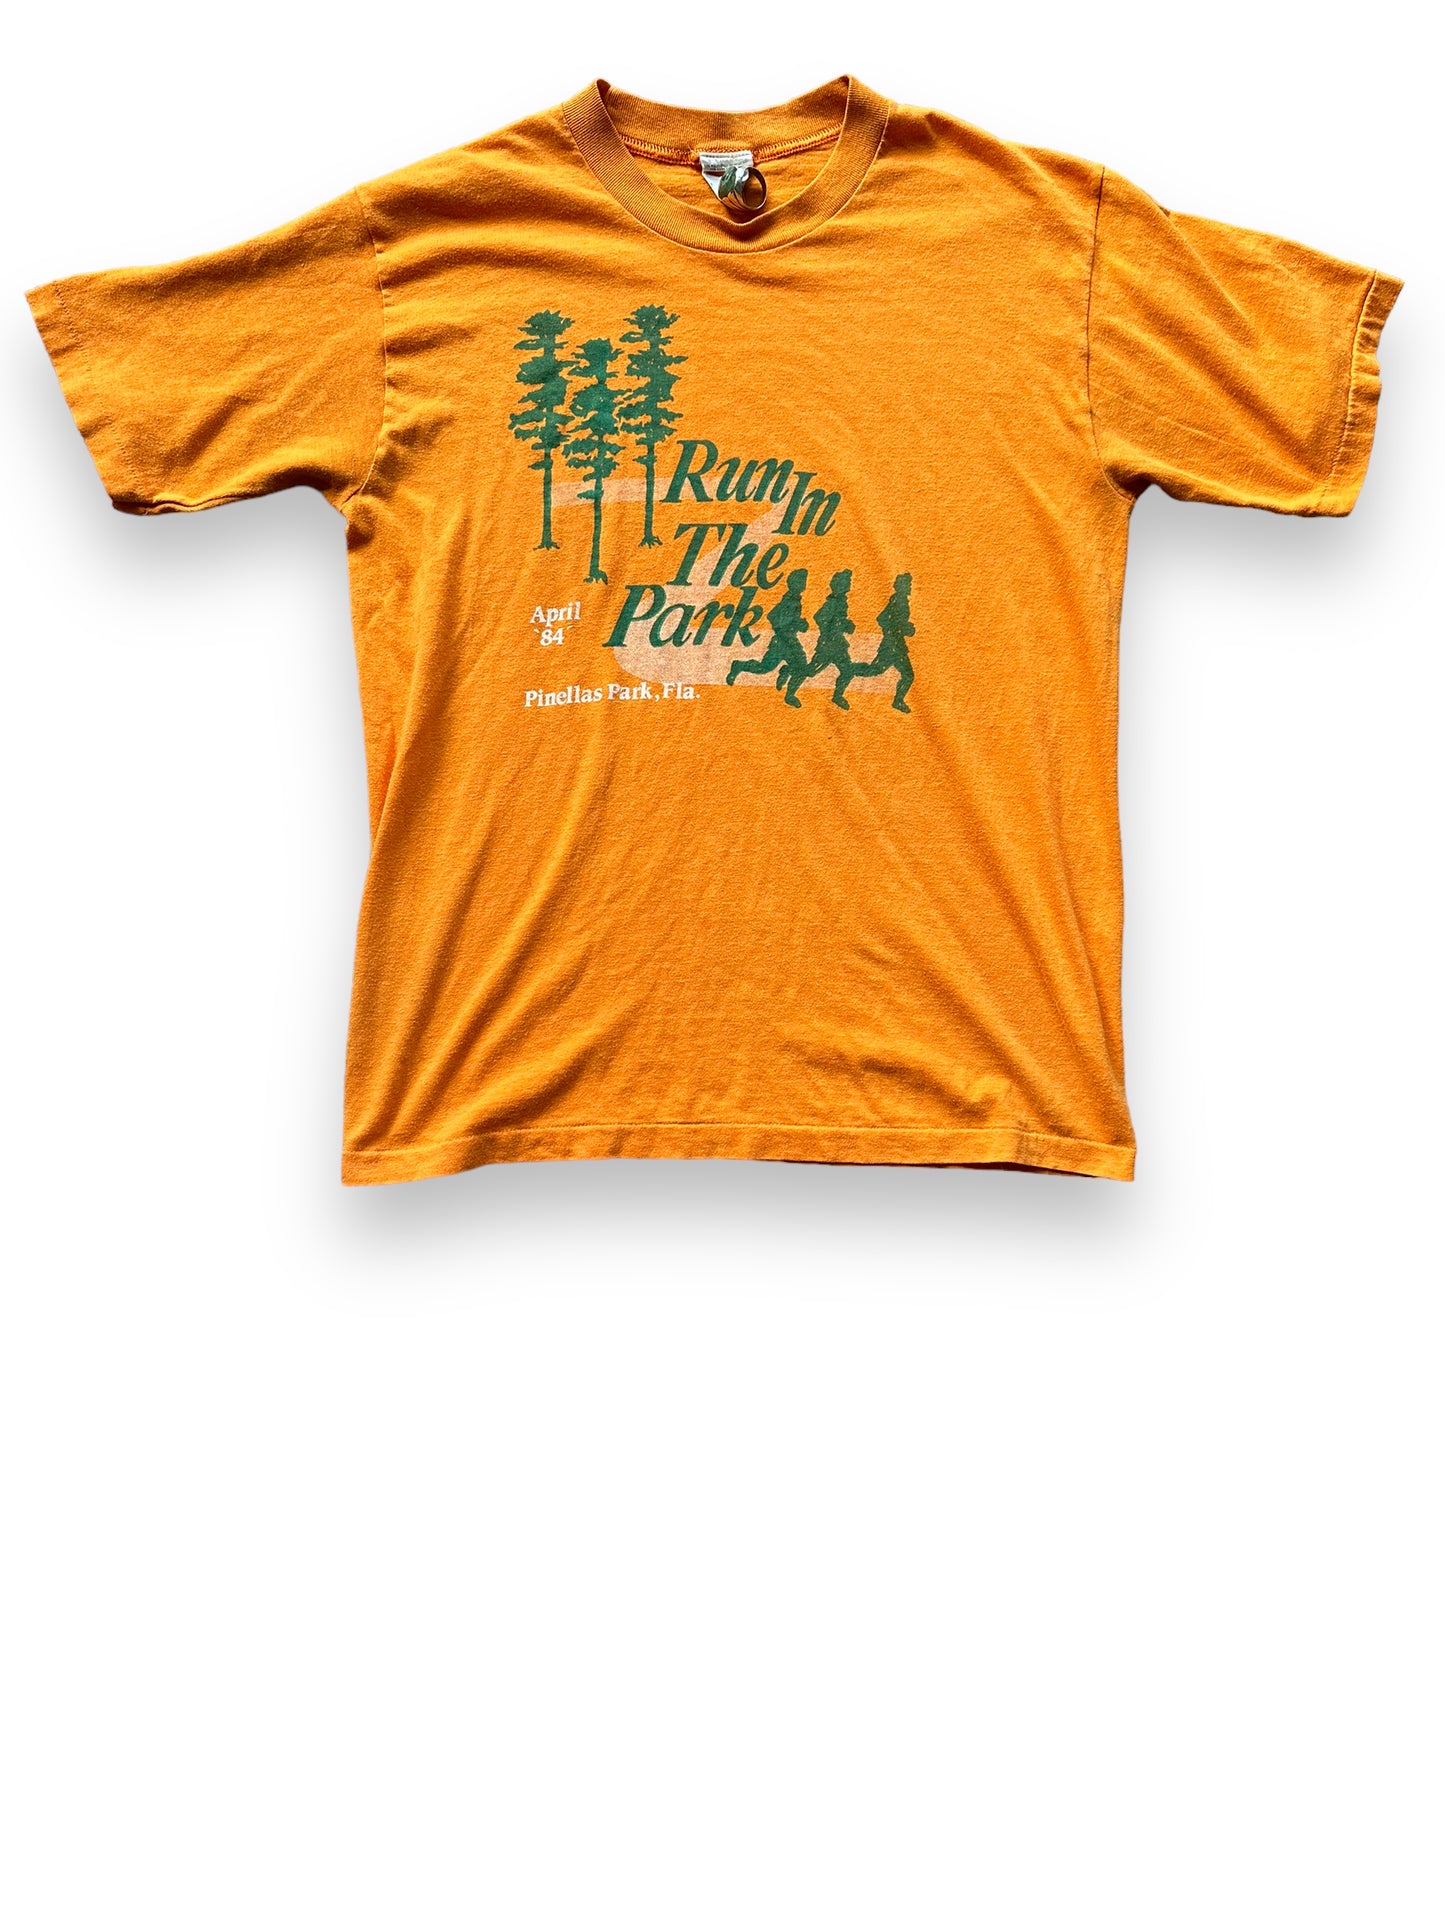 Front View of 1984 Run in the Park Tee SZ L | Vintage Graphic T-Shirts Seattle | Barn Owl Vintage Tees Seattle